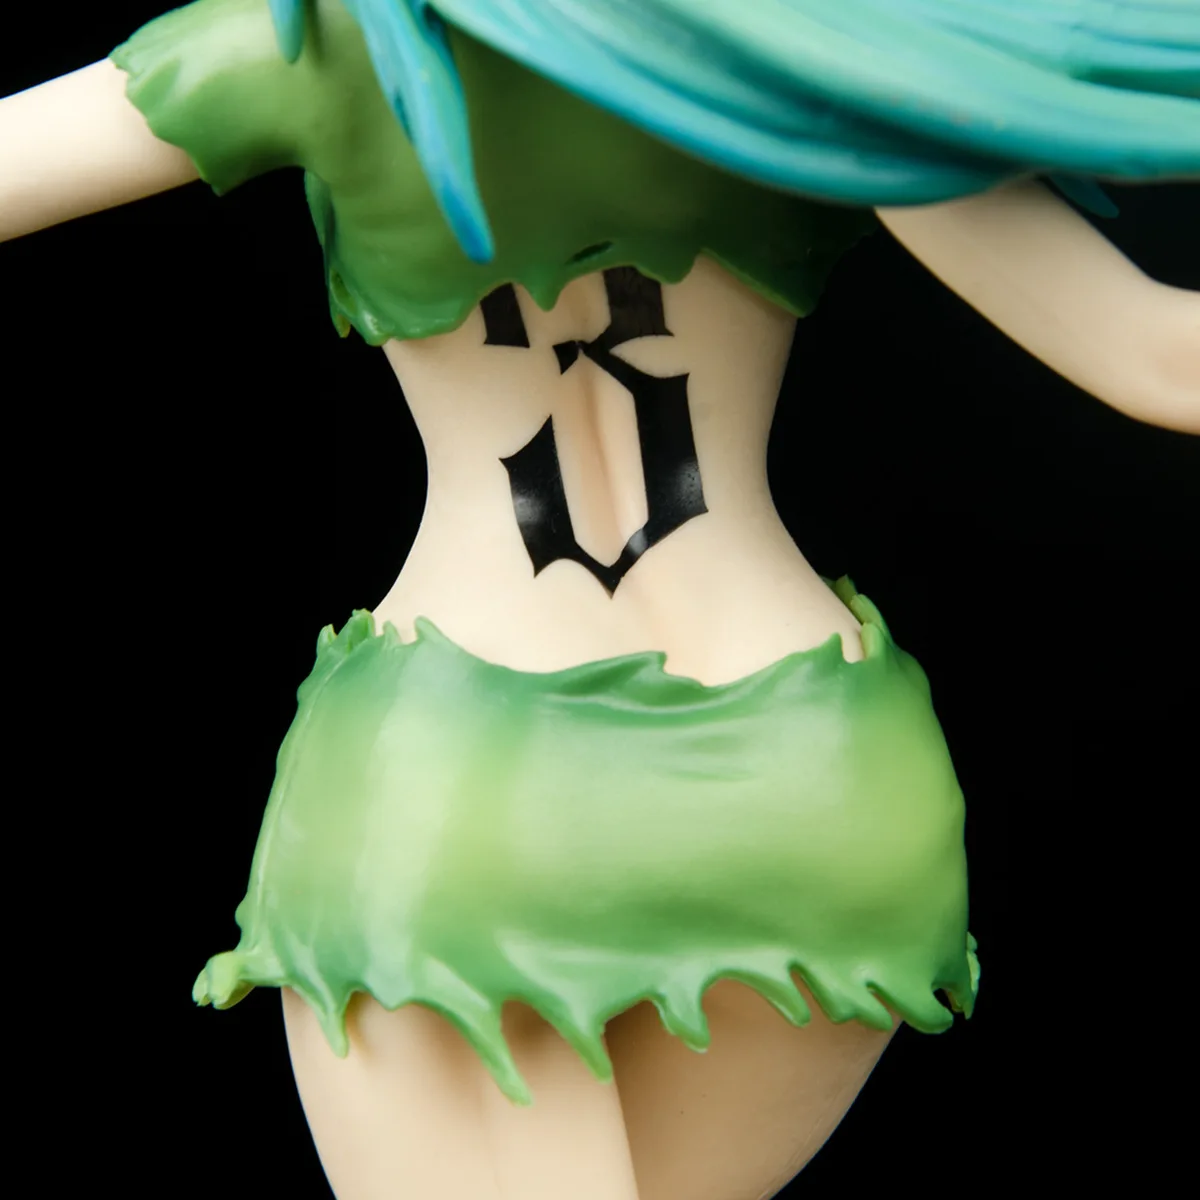 Japanese Anime BLEACH Figure Gk Nelliel Tu Odelschw PVC Action Figure Toy Collection Model Doll Game Statue Gift 28CM